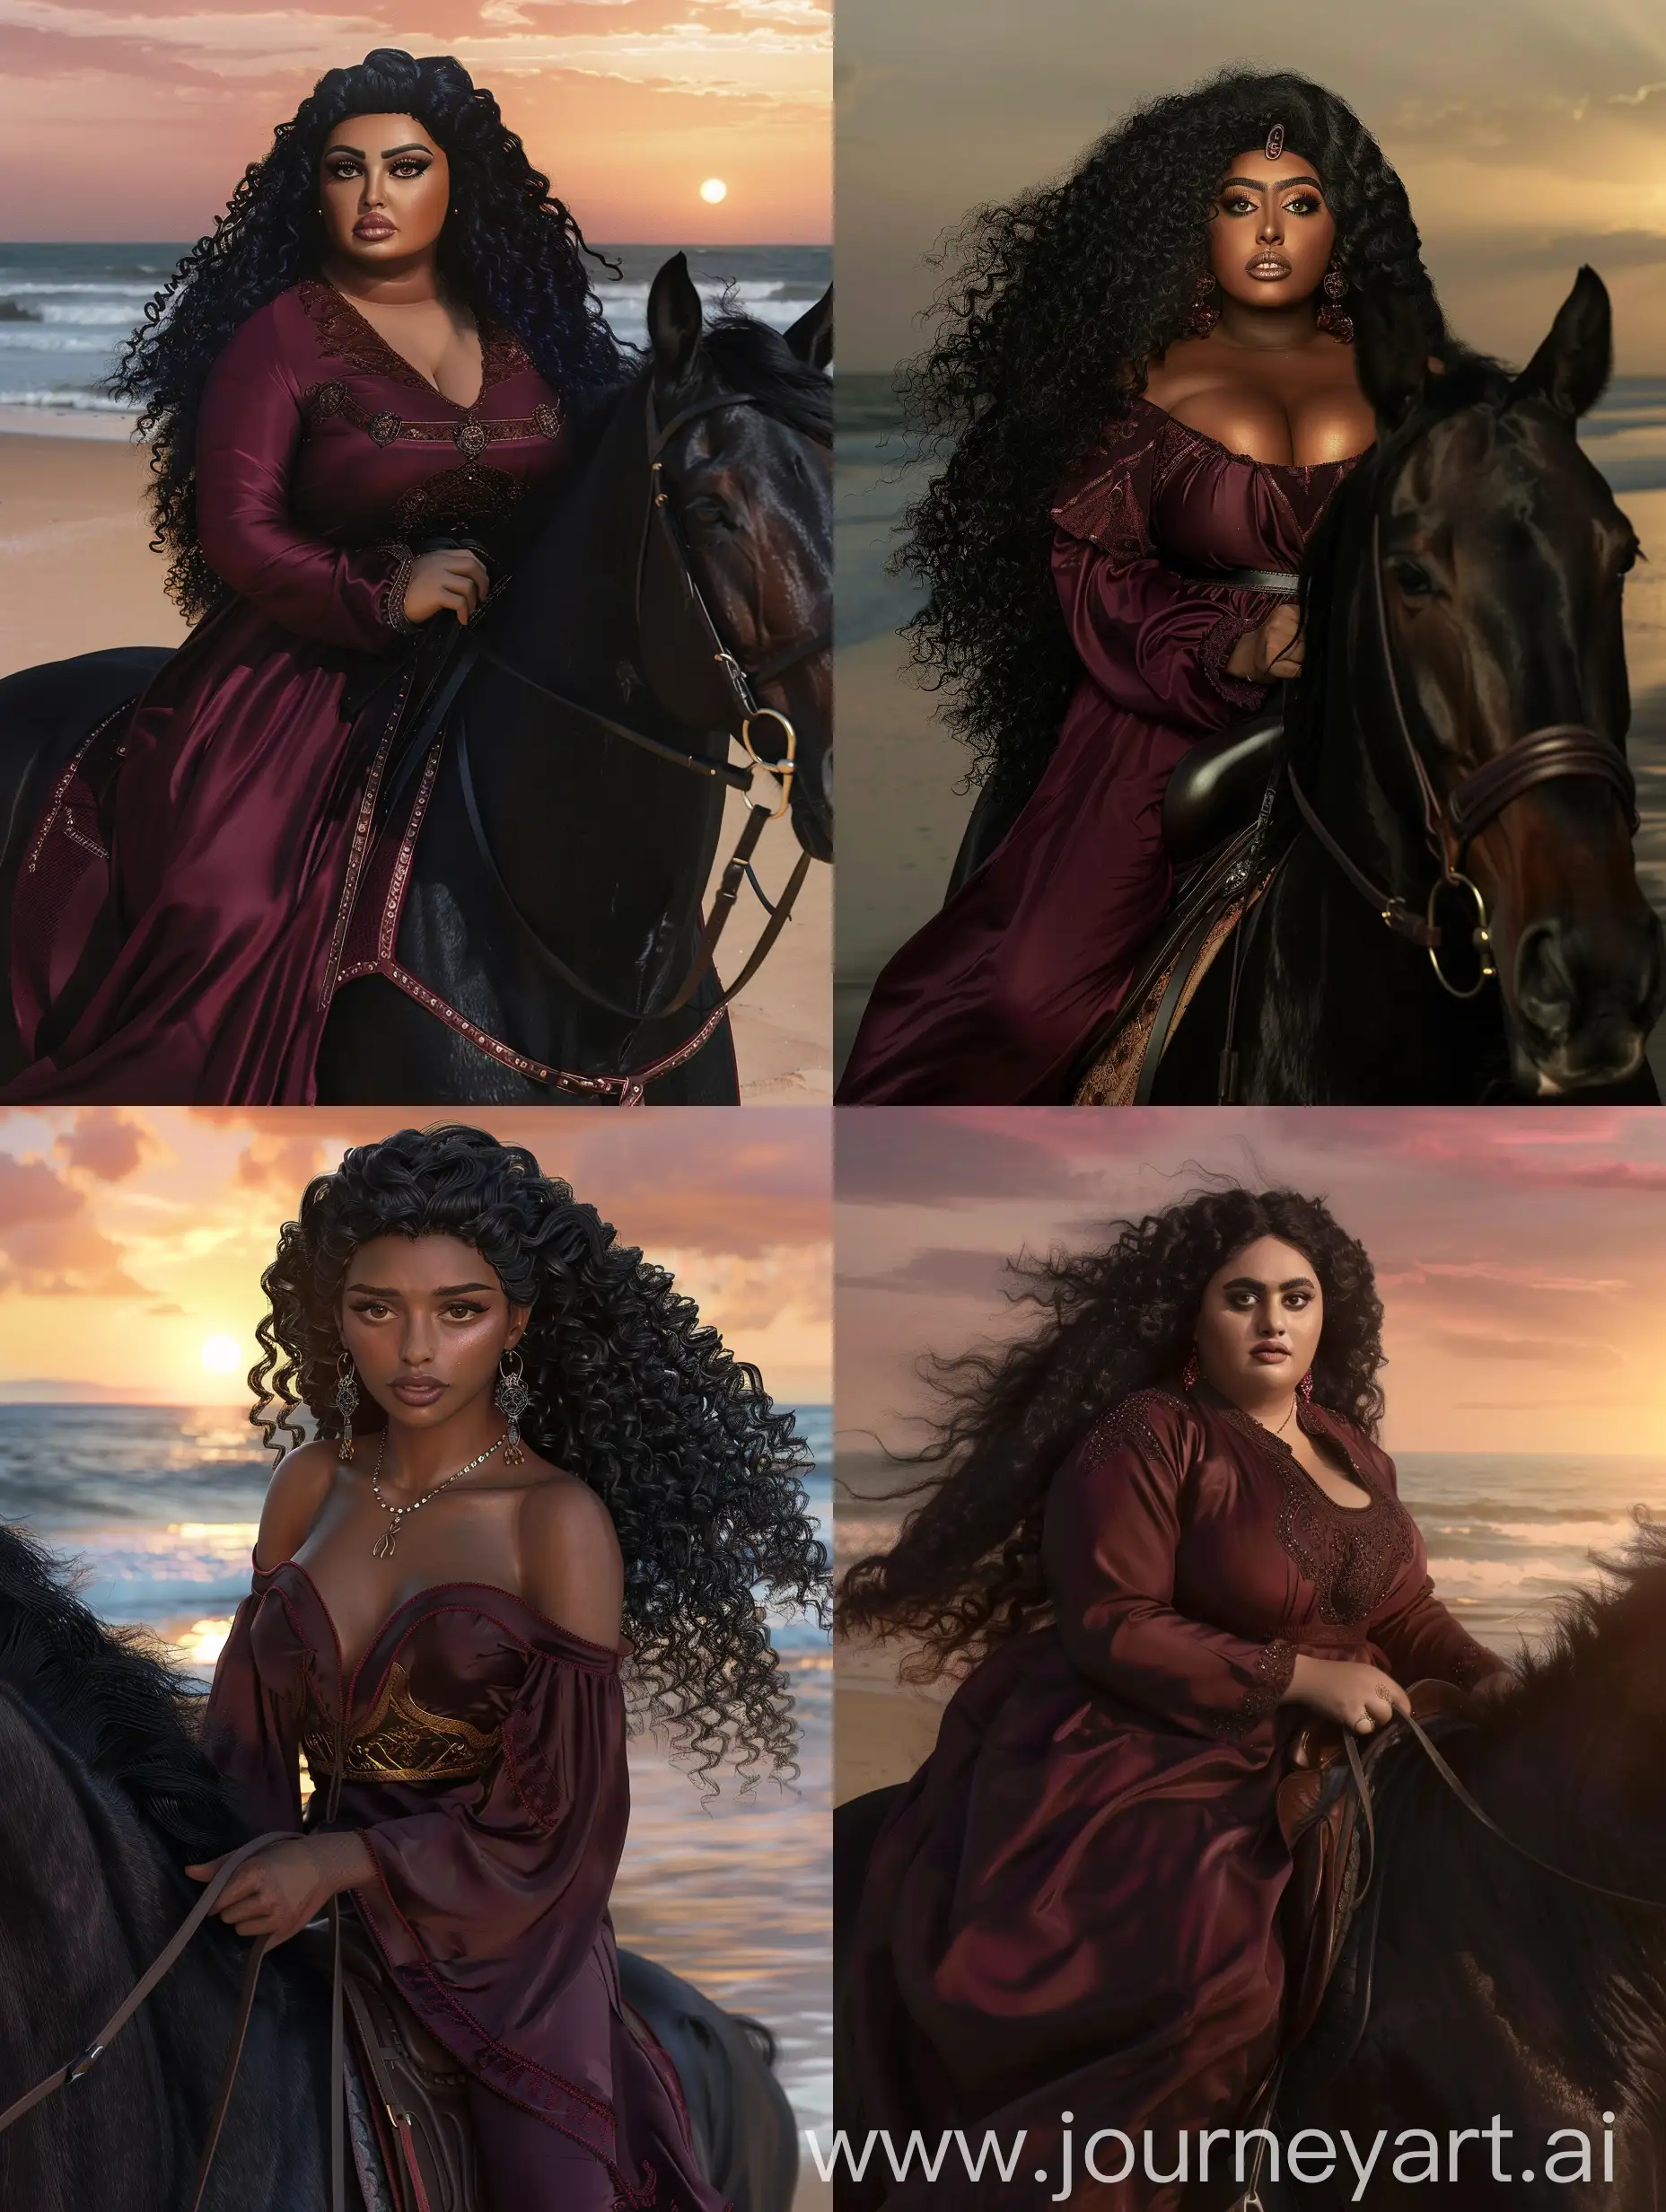 black-skinned woman, weighing 80 kilograms, with features from the Arabian Gulf region, with large breasts, a large ass, wide brown eyes, full lips, a small nose, and long black curly hair. She wears traditional burgundy-coloured Kuwaiti clothing, riding a purebred black Arabian horse at sunset on the beach.